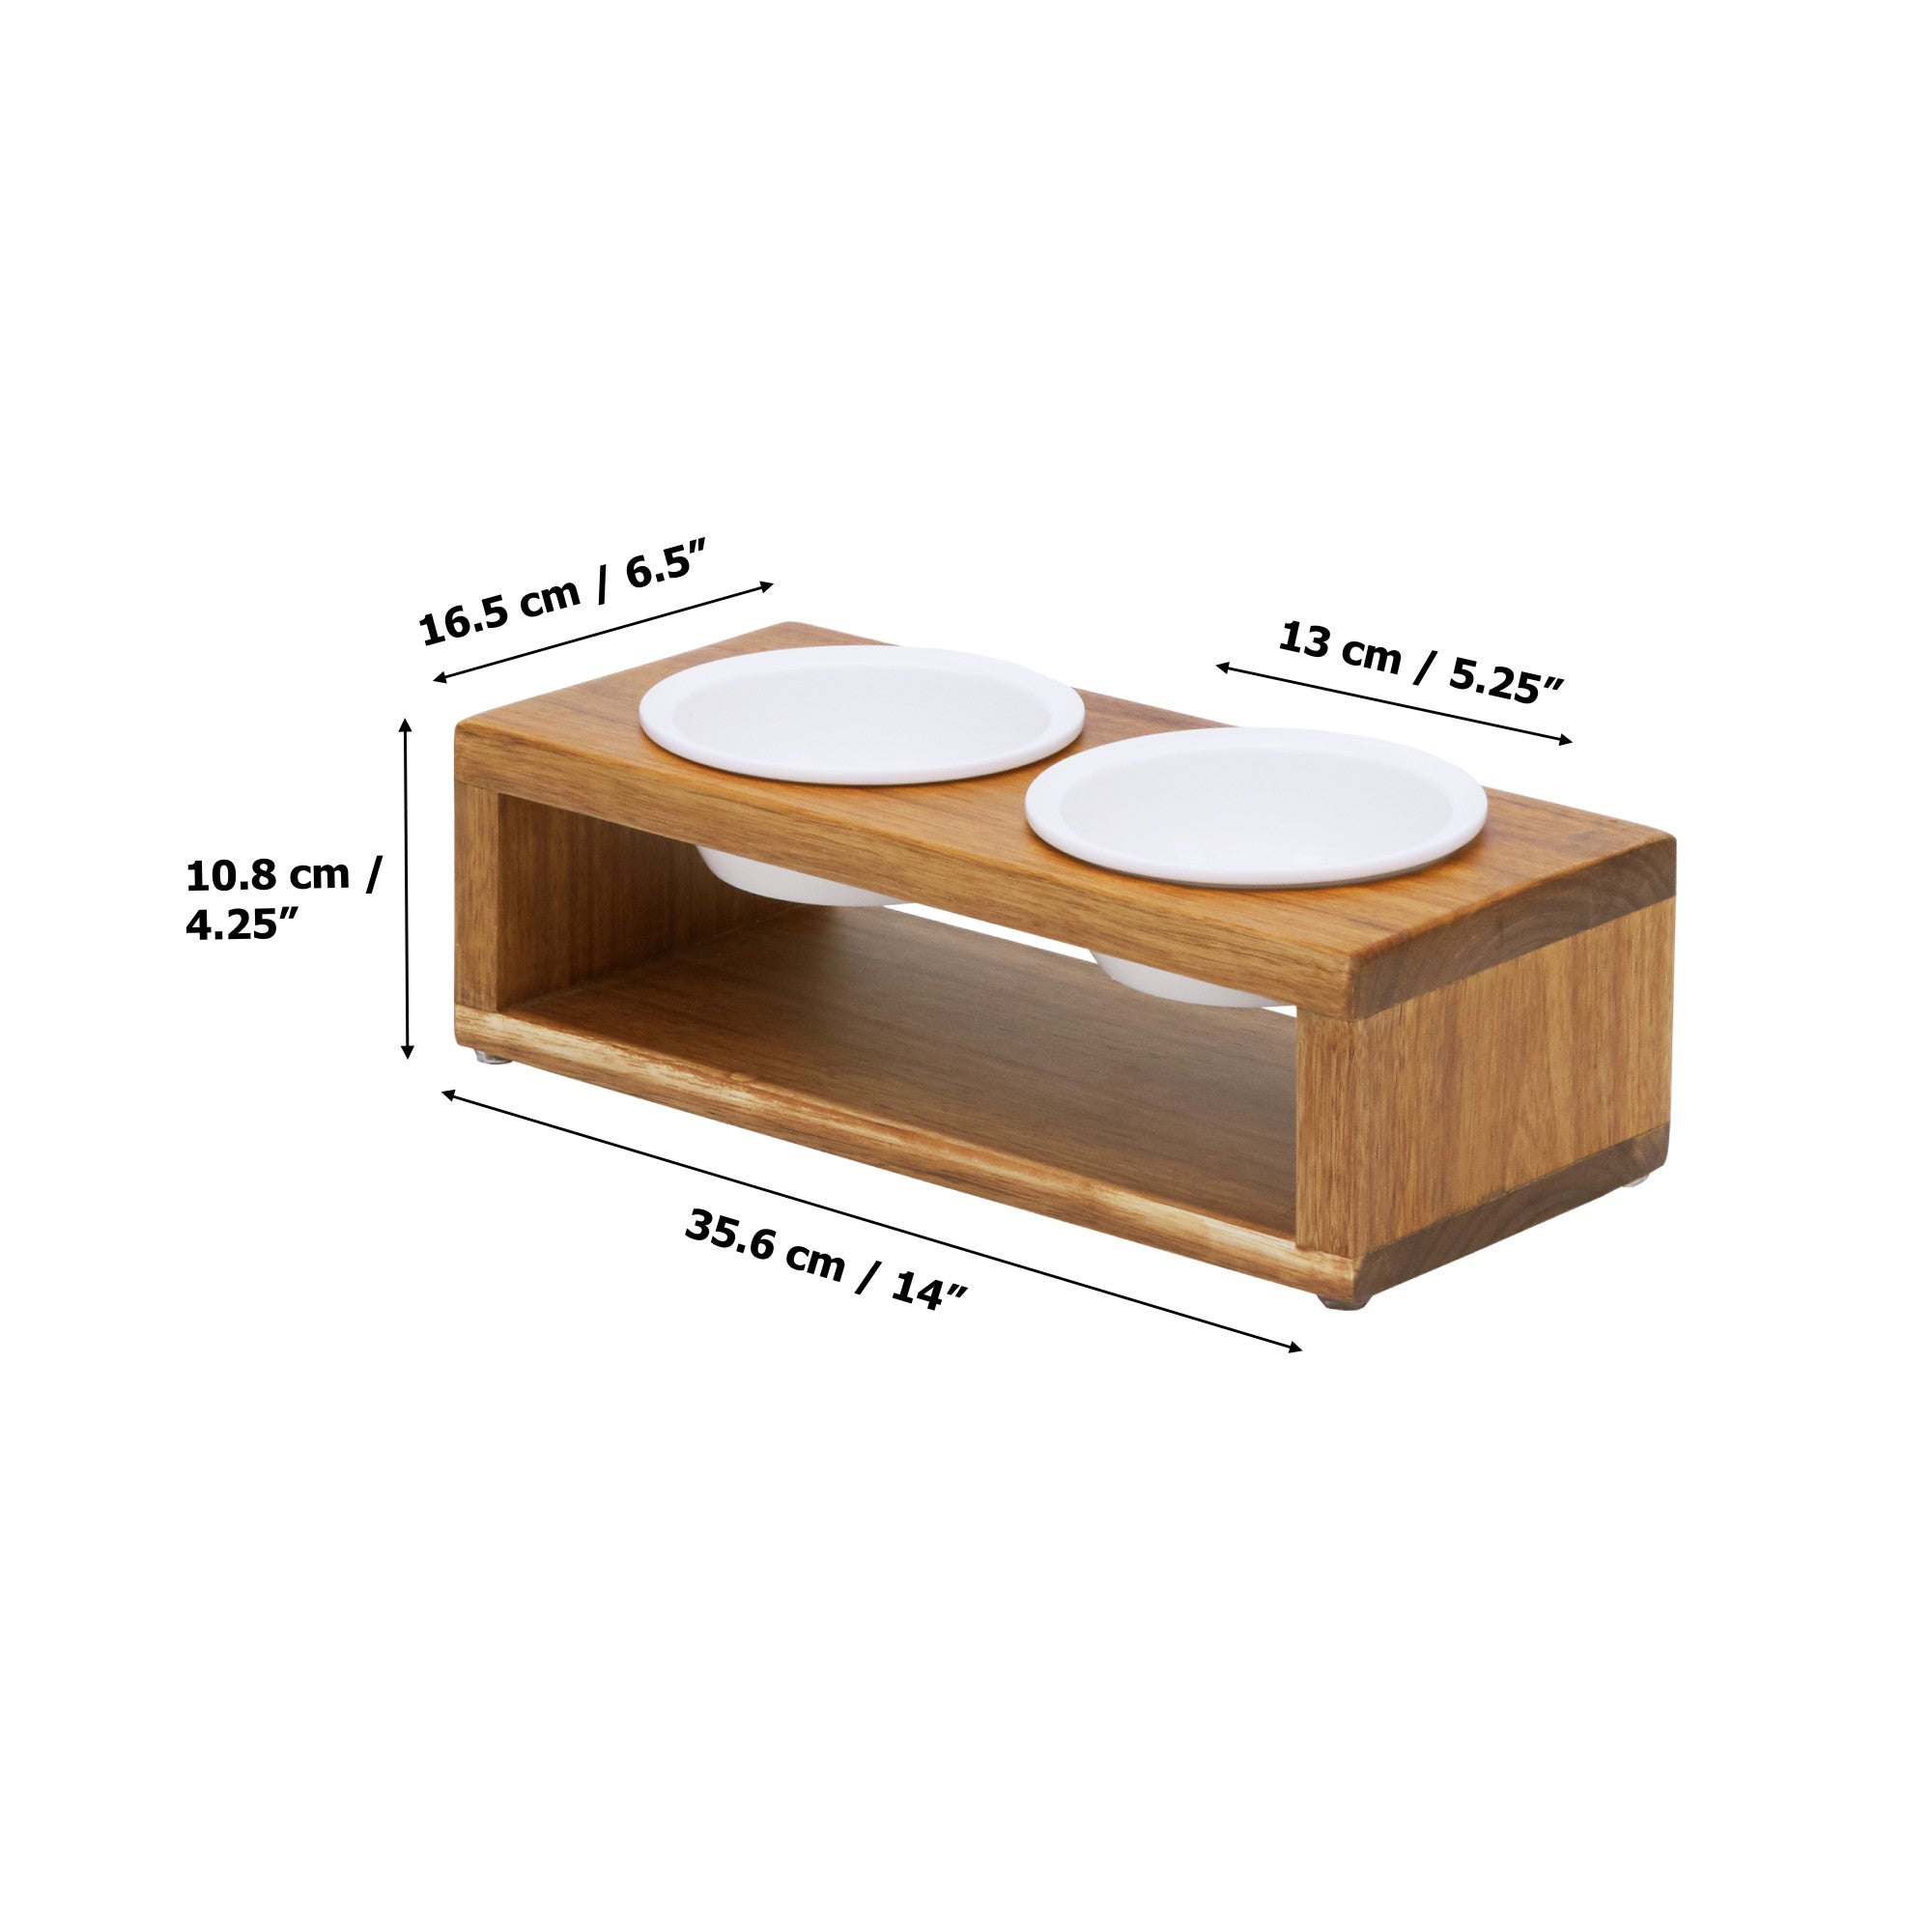 Teamson Pets Billie Small Elevated Wood Pet Feeder with Ceramic Bowls, Brown